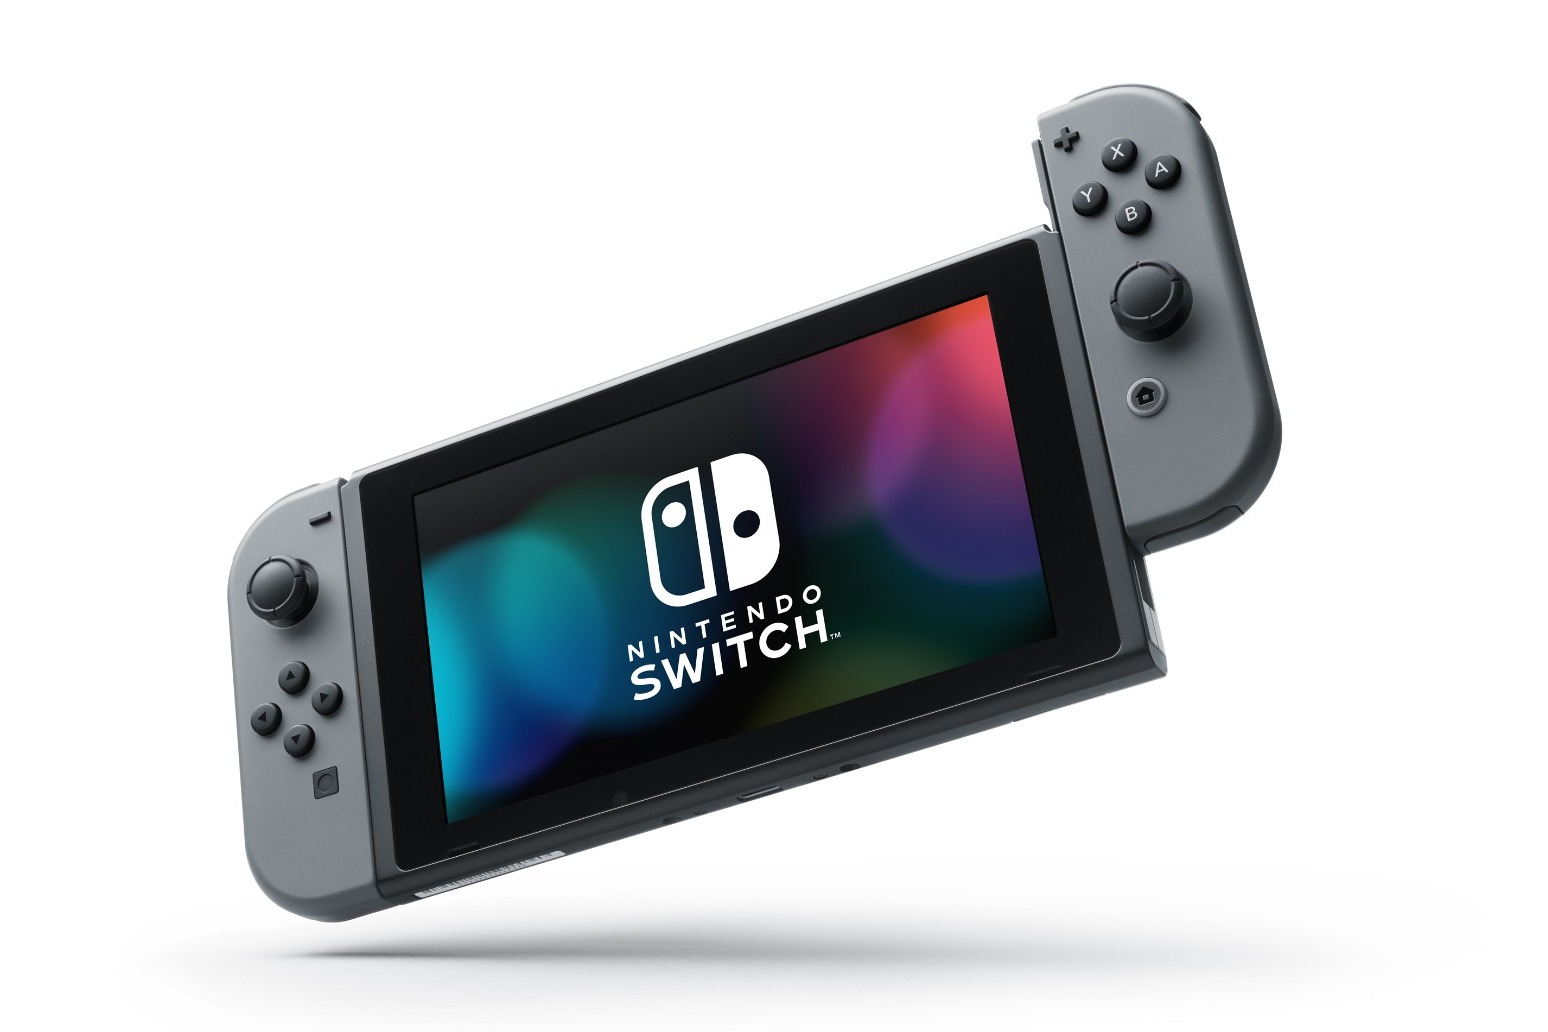 Nintendo Switch fault should be investigated, consumer group says 